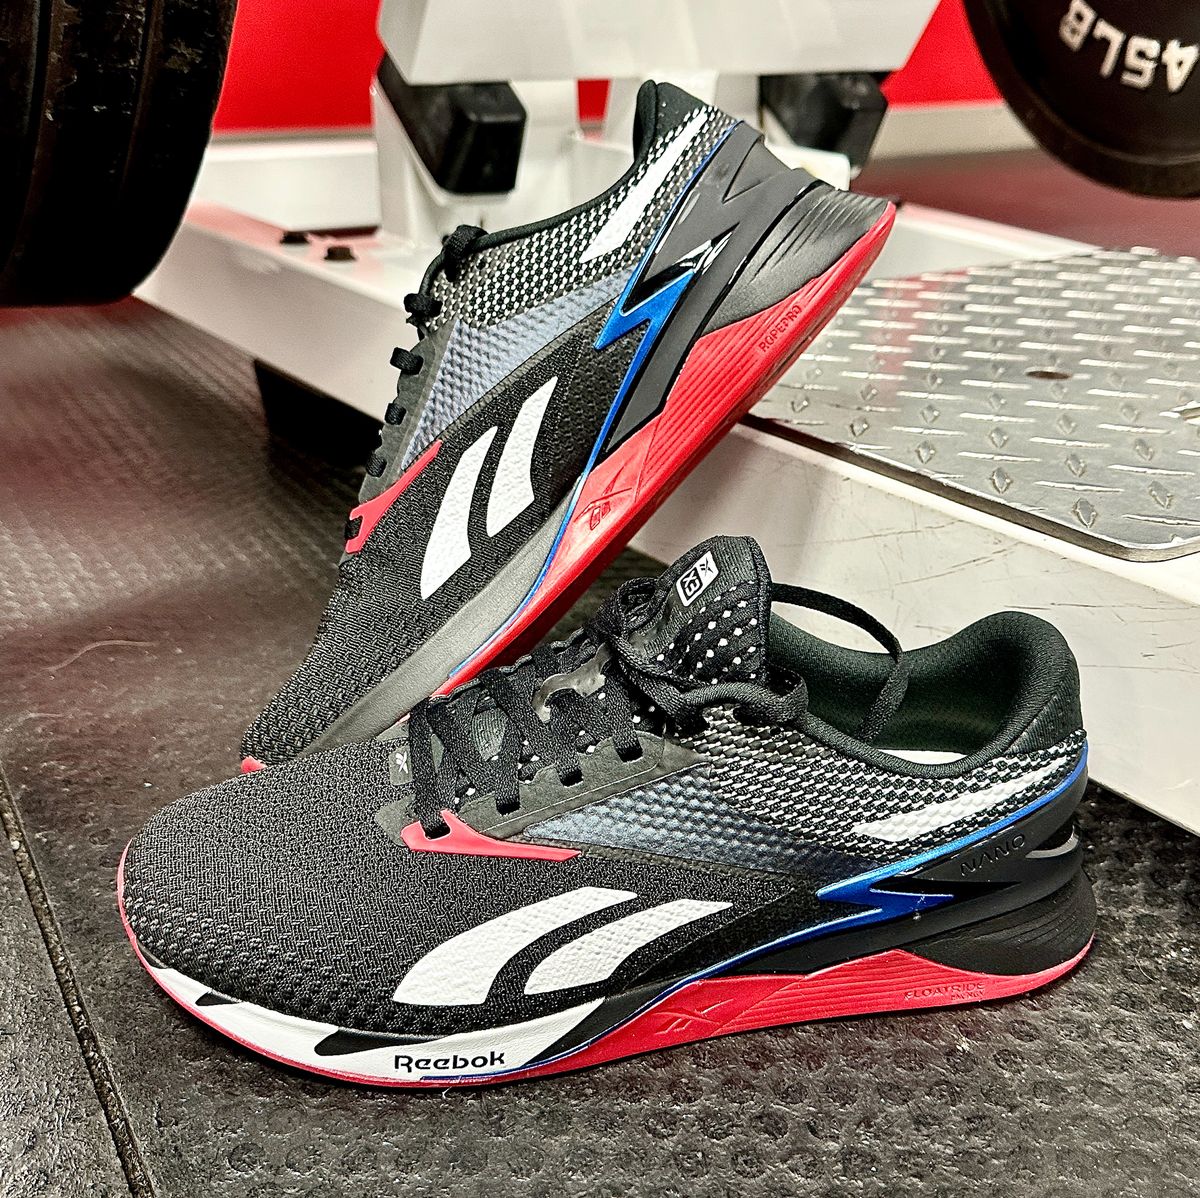 Reebok Nano X3 Review: Are These the Best Trainers